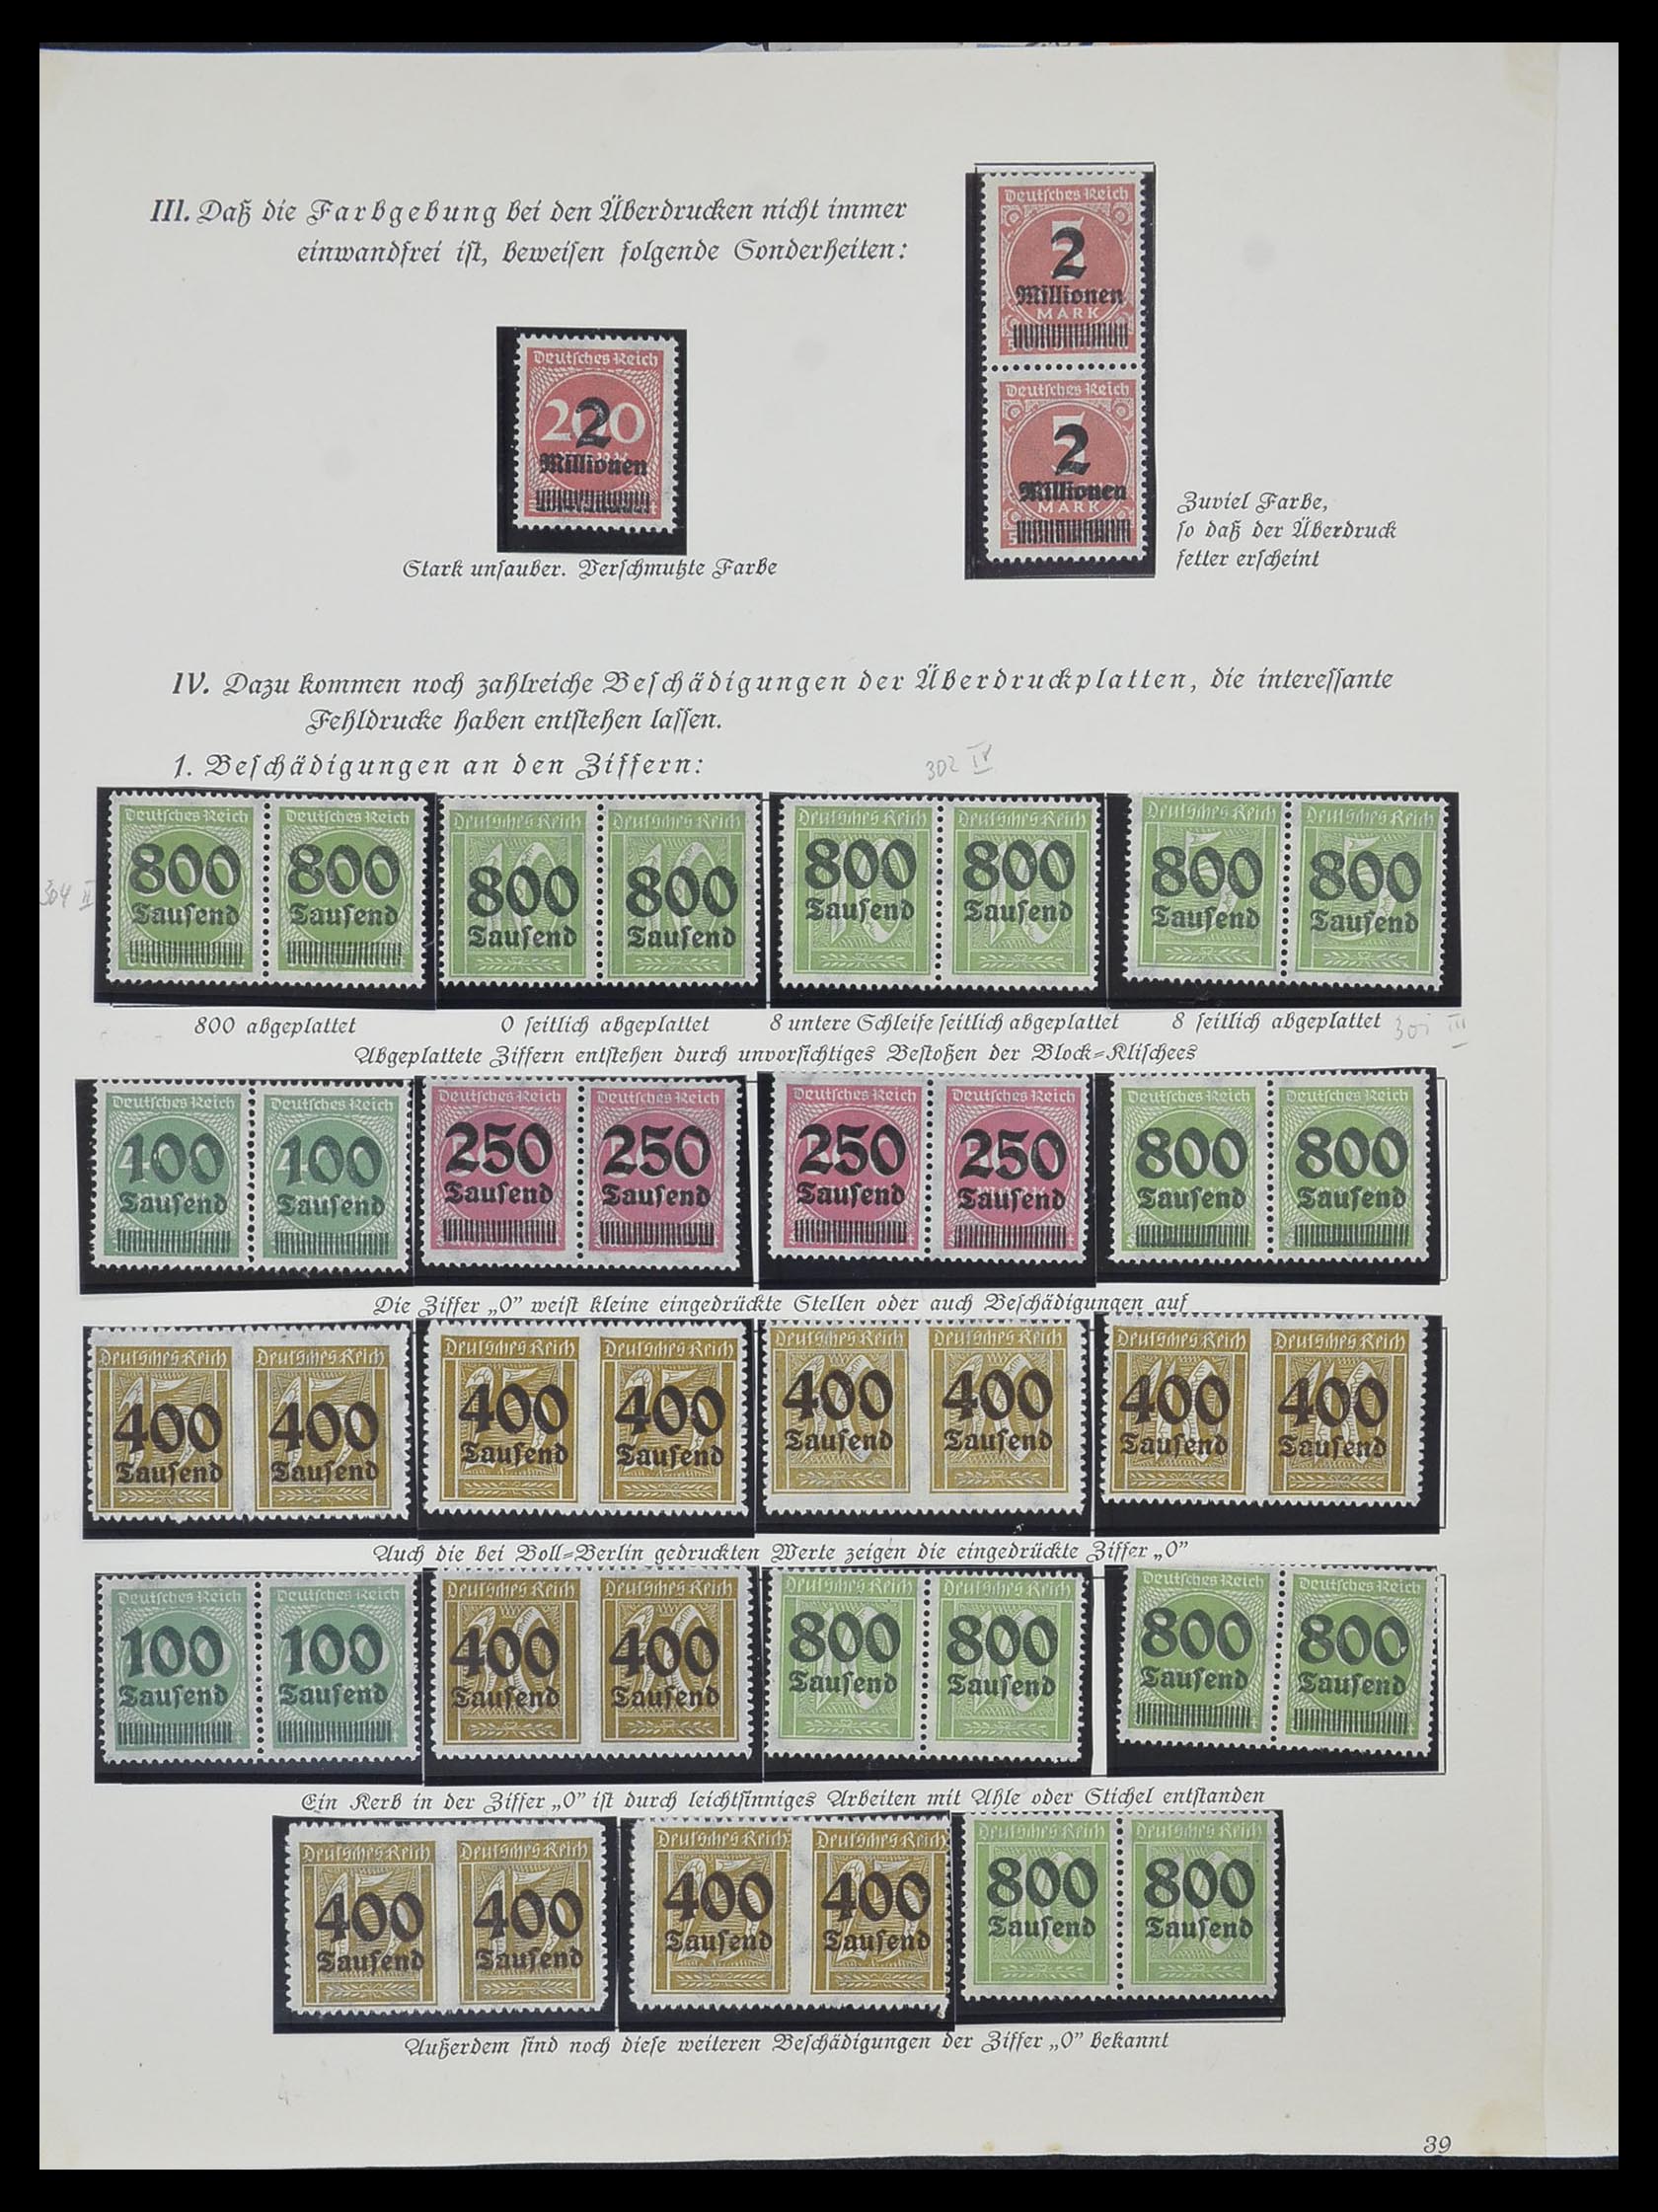 33957 017 - Stamp collection 33957 German Reich infla 1923.